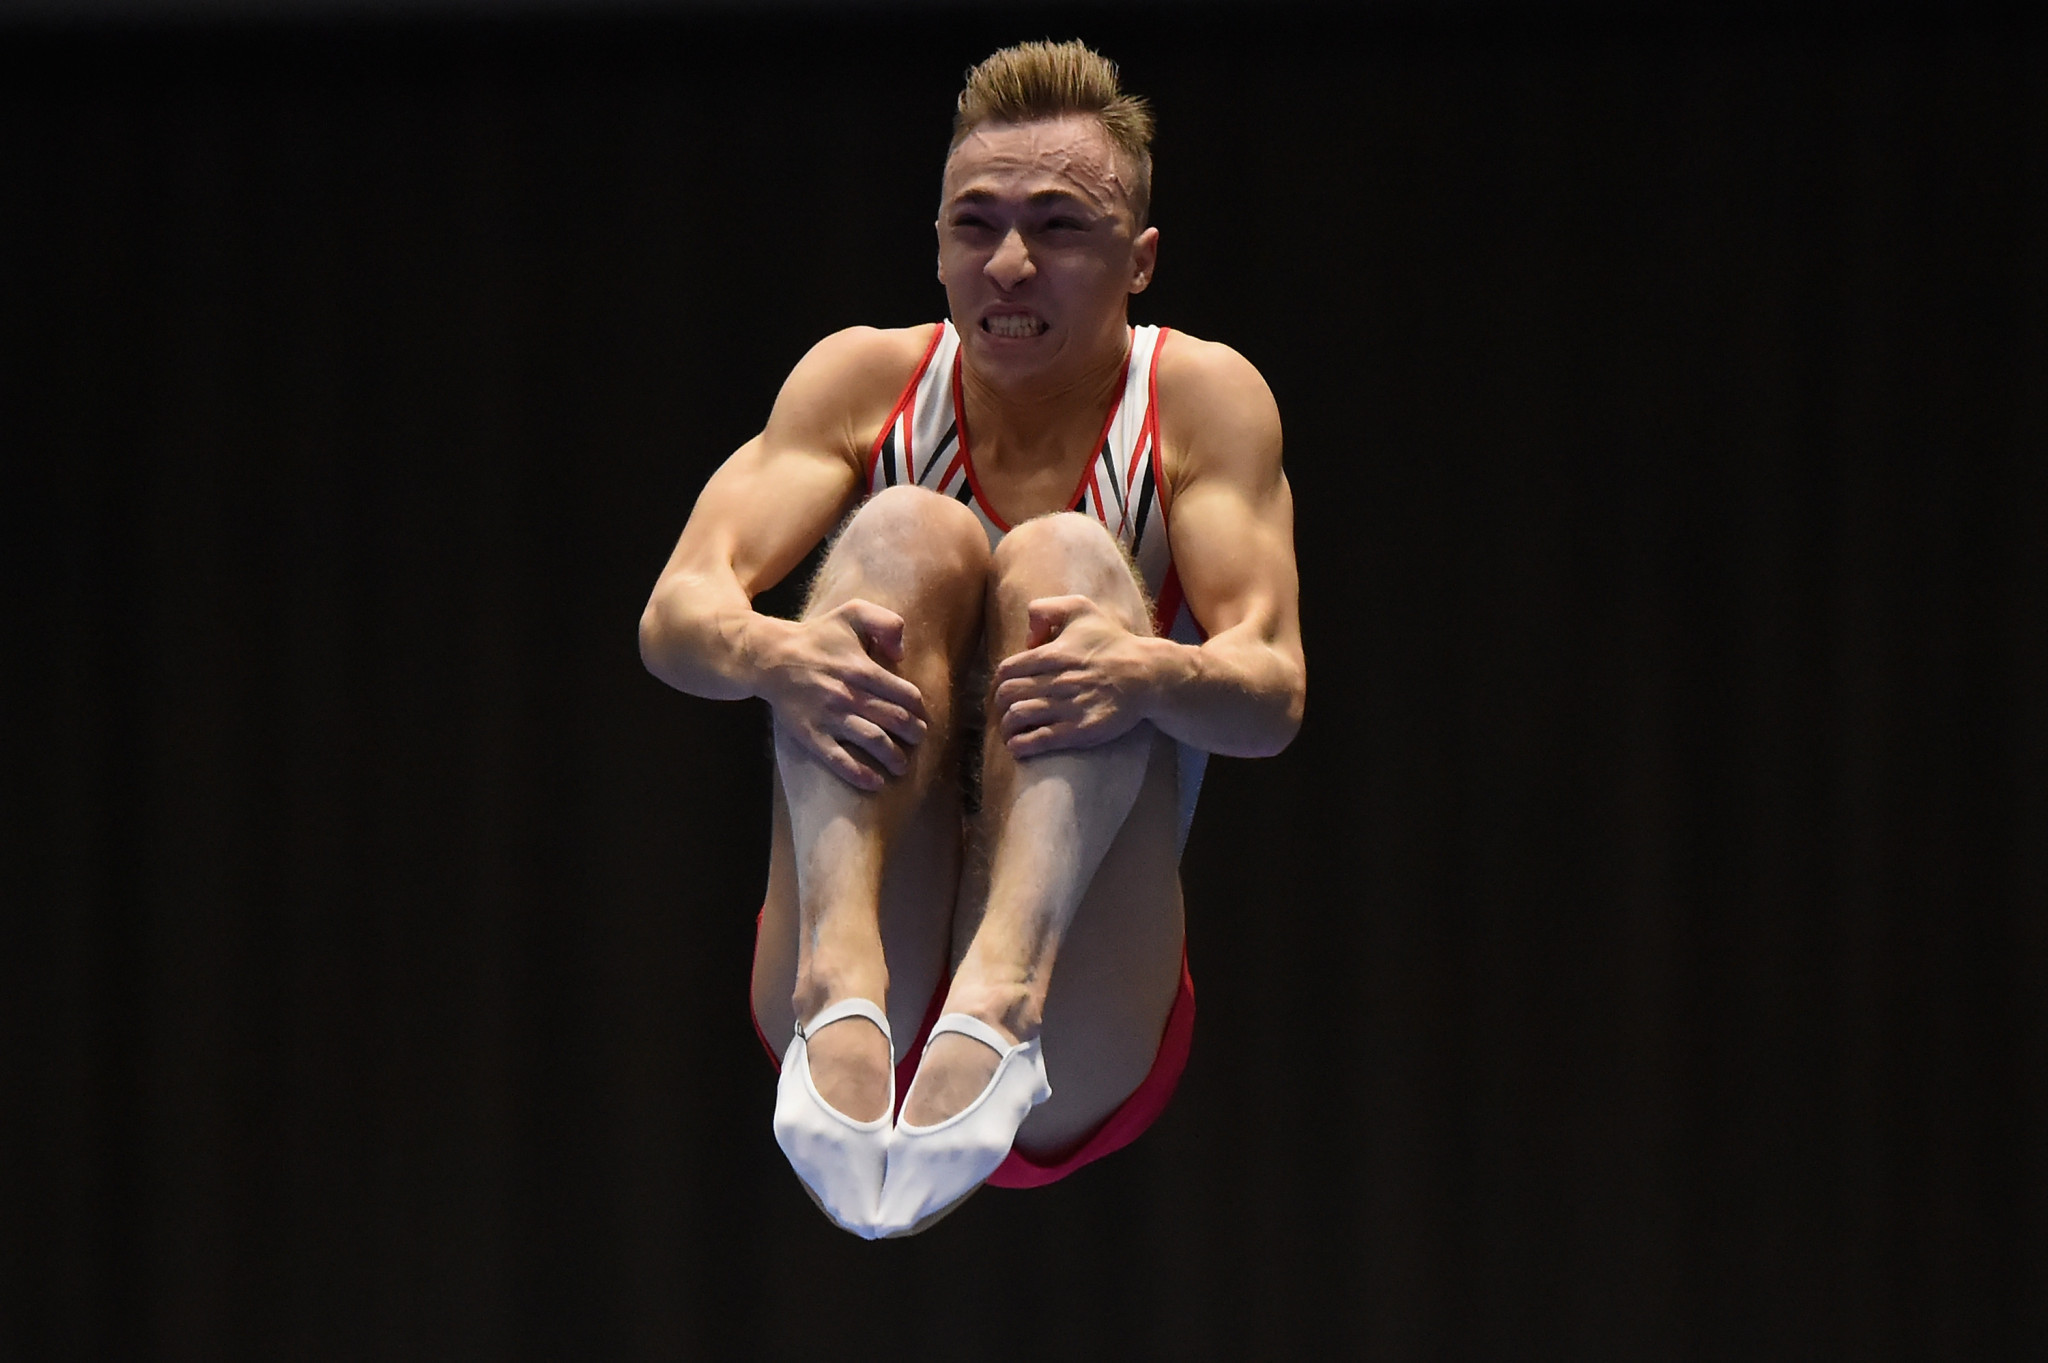 Belarus' Olympic champion Uladzislau Hancharou placed third in men's qualification ©Getty Images